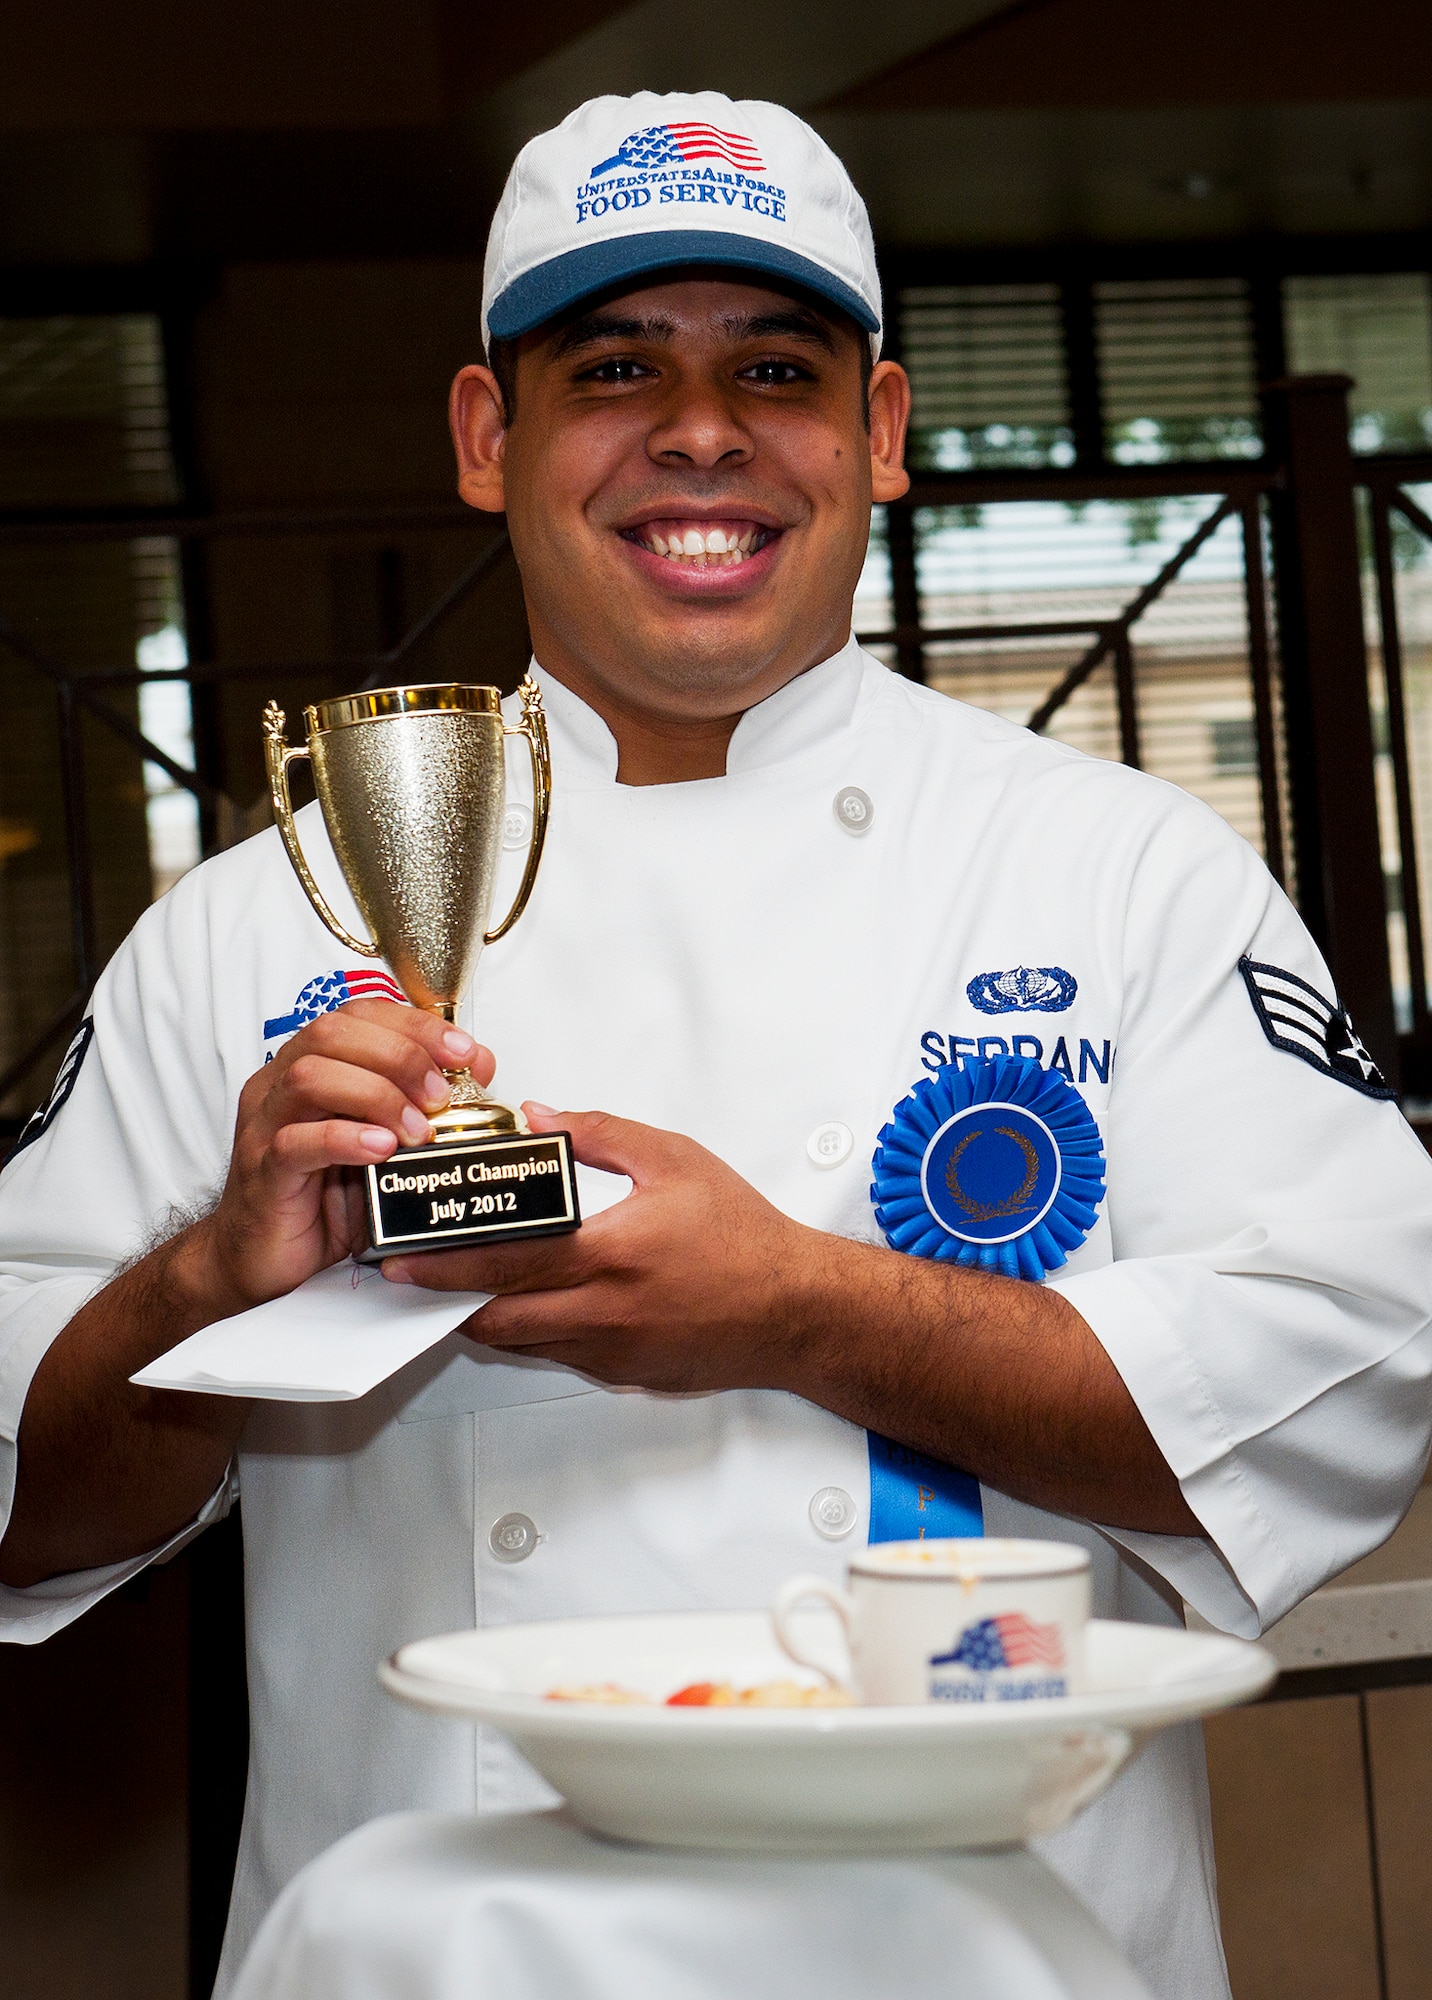 Senior Airman Gamaliel Serrano won the base’s first “Chopped” cooking competition July 24 at Eglin.  Five Airmen from the 96th Force Support Squadron had an hour to cook a meal with three secret ingredients.  (U.S. Air Force photo/Samuel King Jr.)